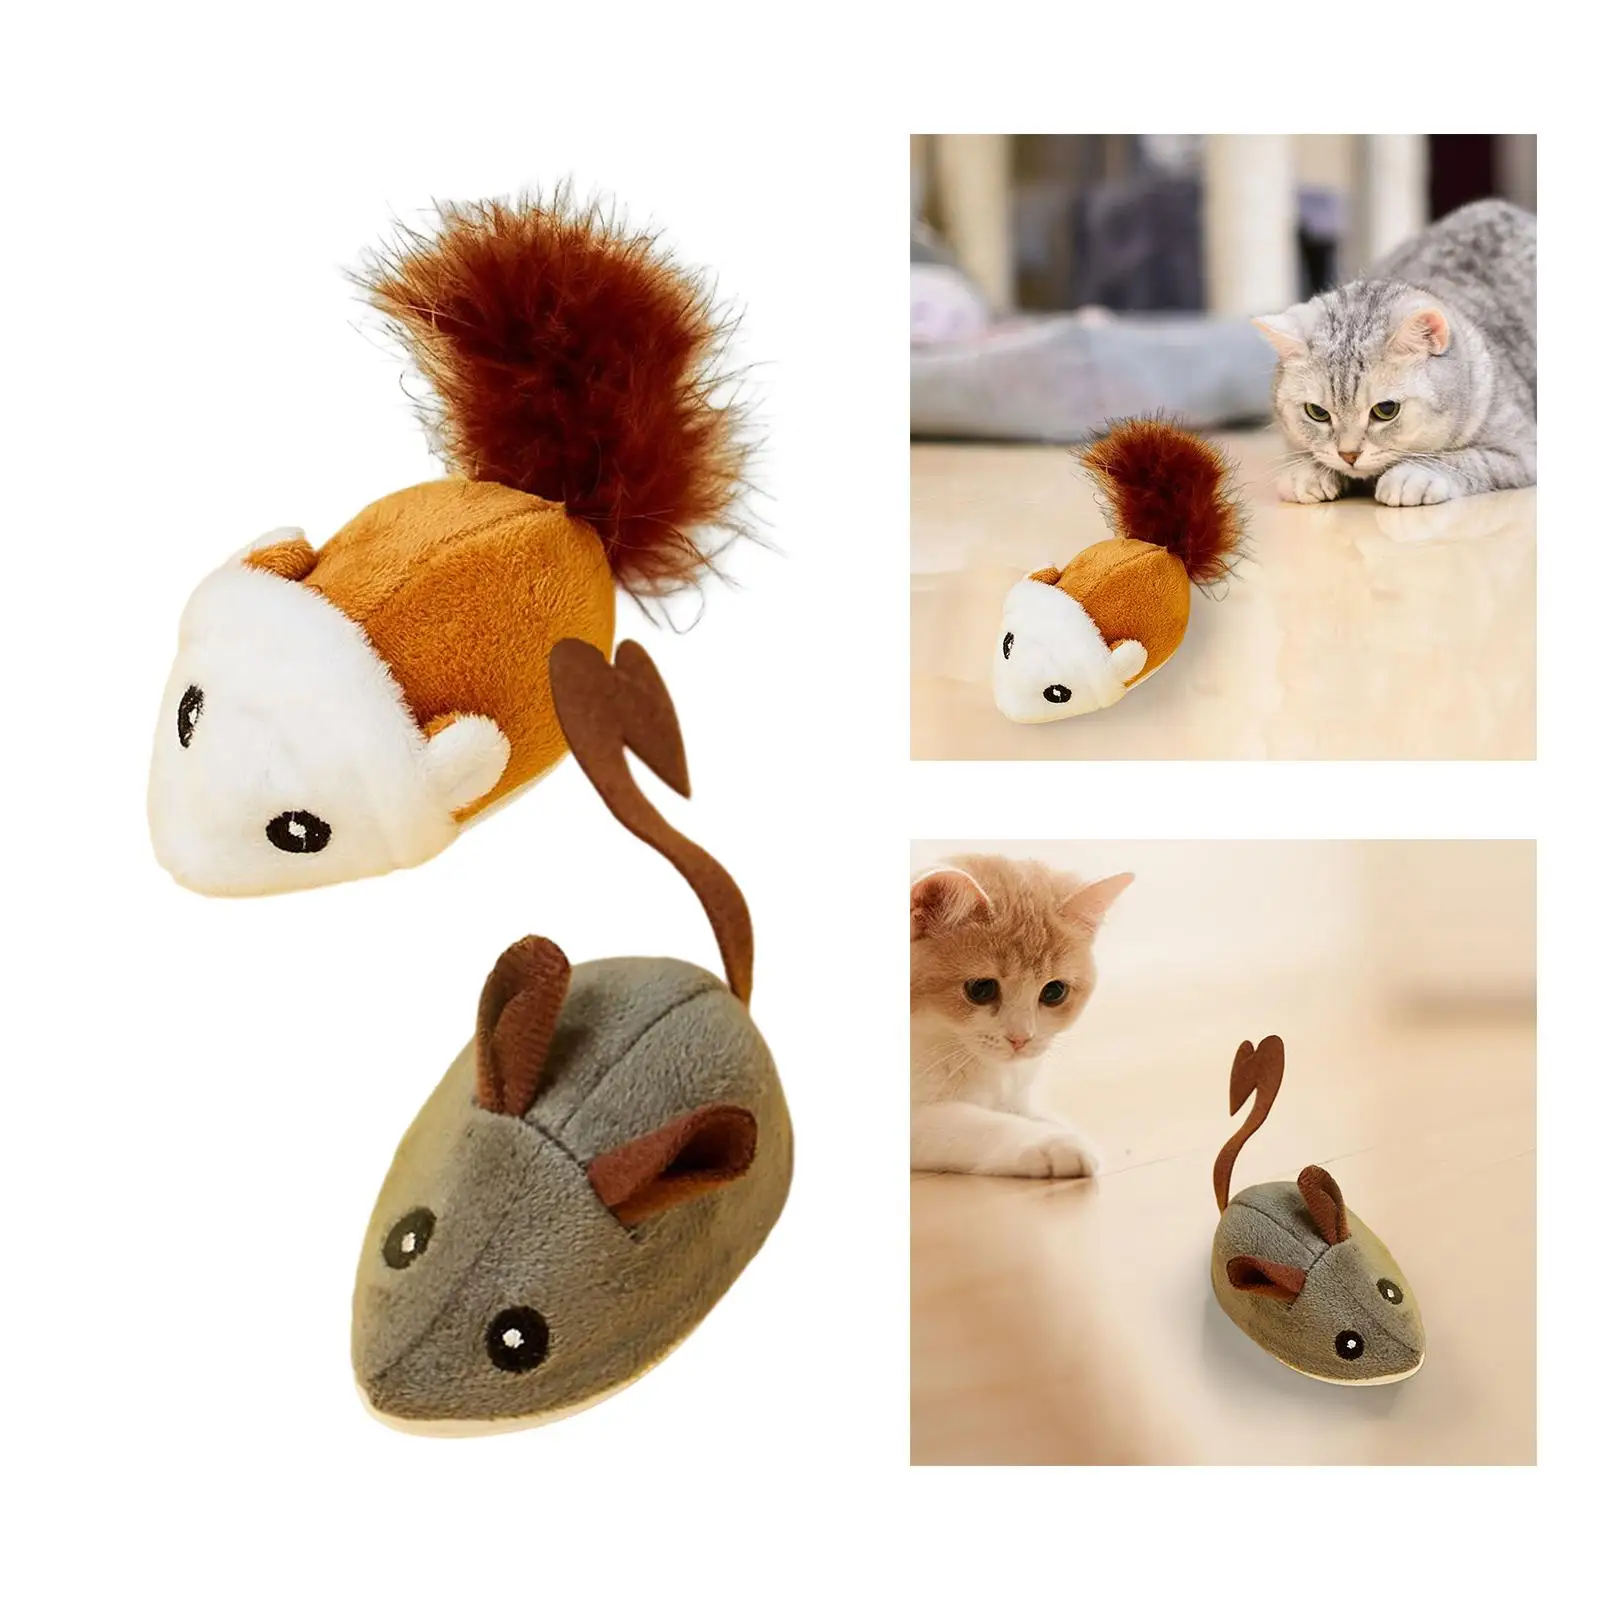 Simulation Toys Vivid Interactive Soft Portable Electric Moving Furry Plush Cat Toy for Playing Training Game Exercise Indoor